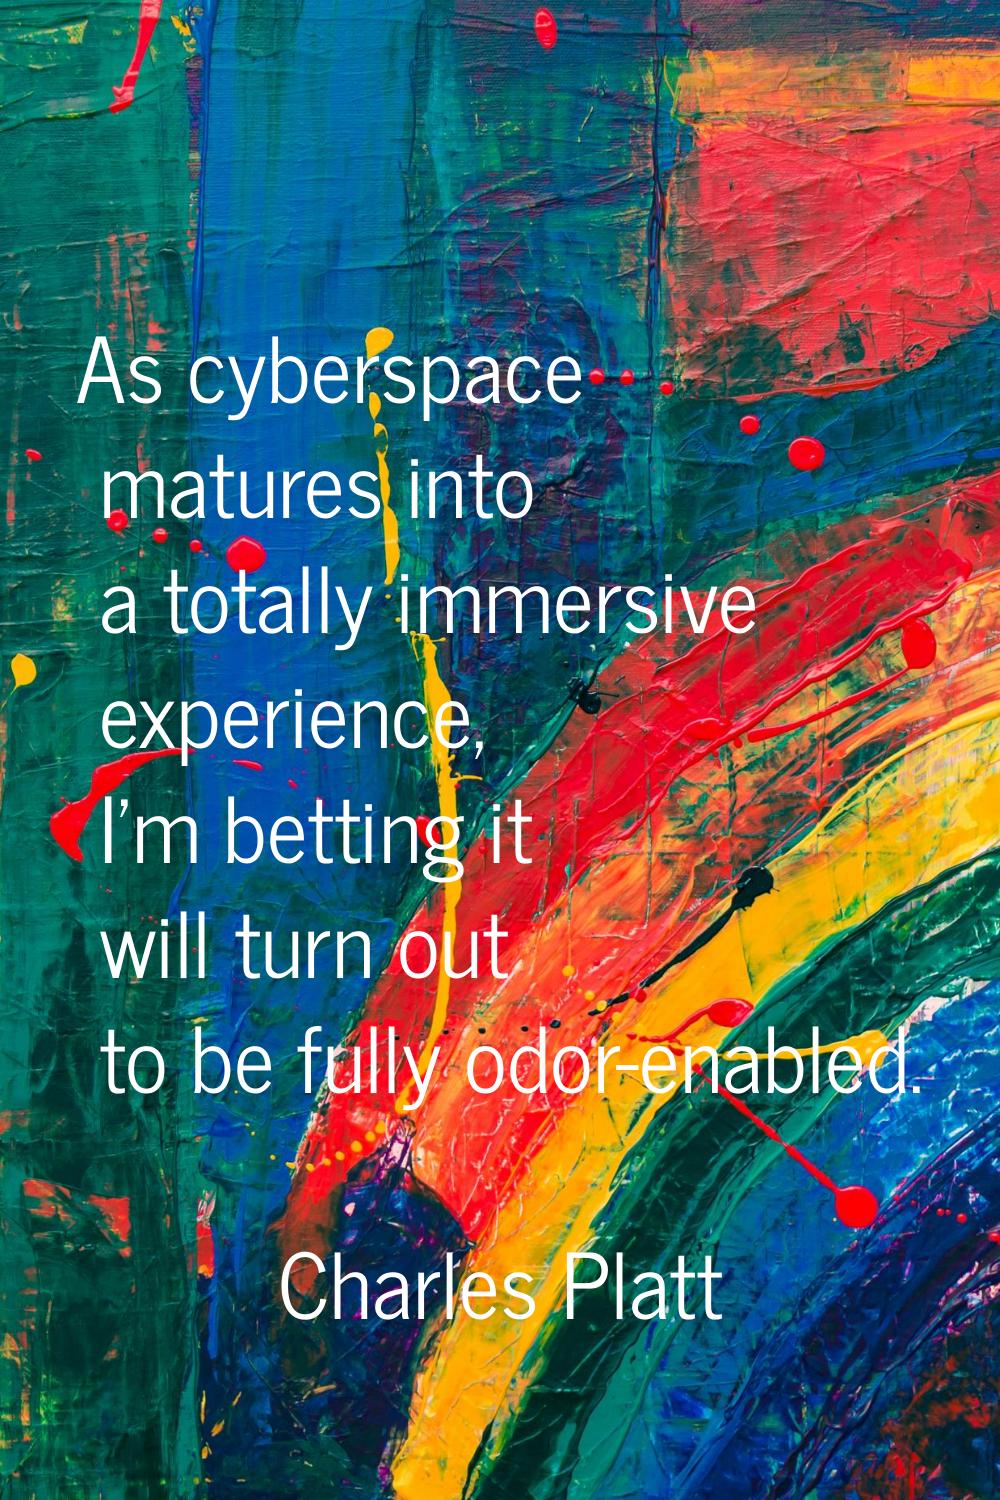 As cyberspace matures into a totally immersive experience, I'm betting it will turn out to be fully